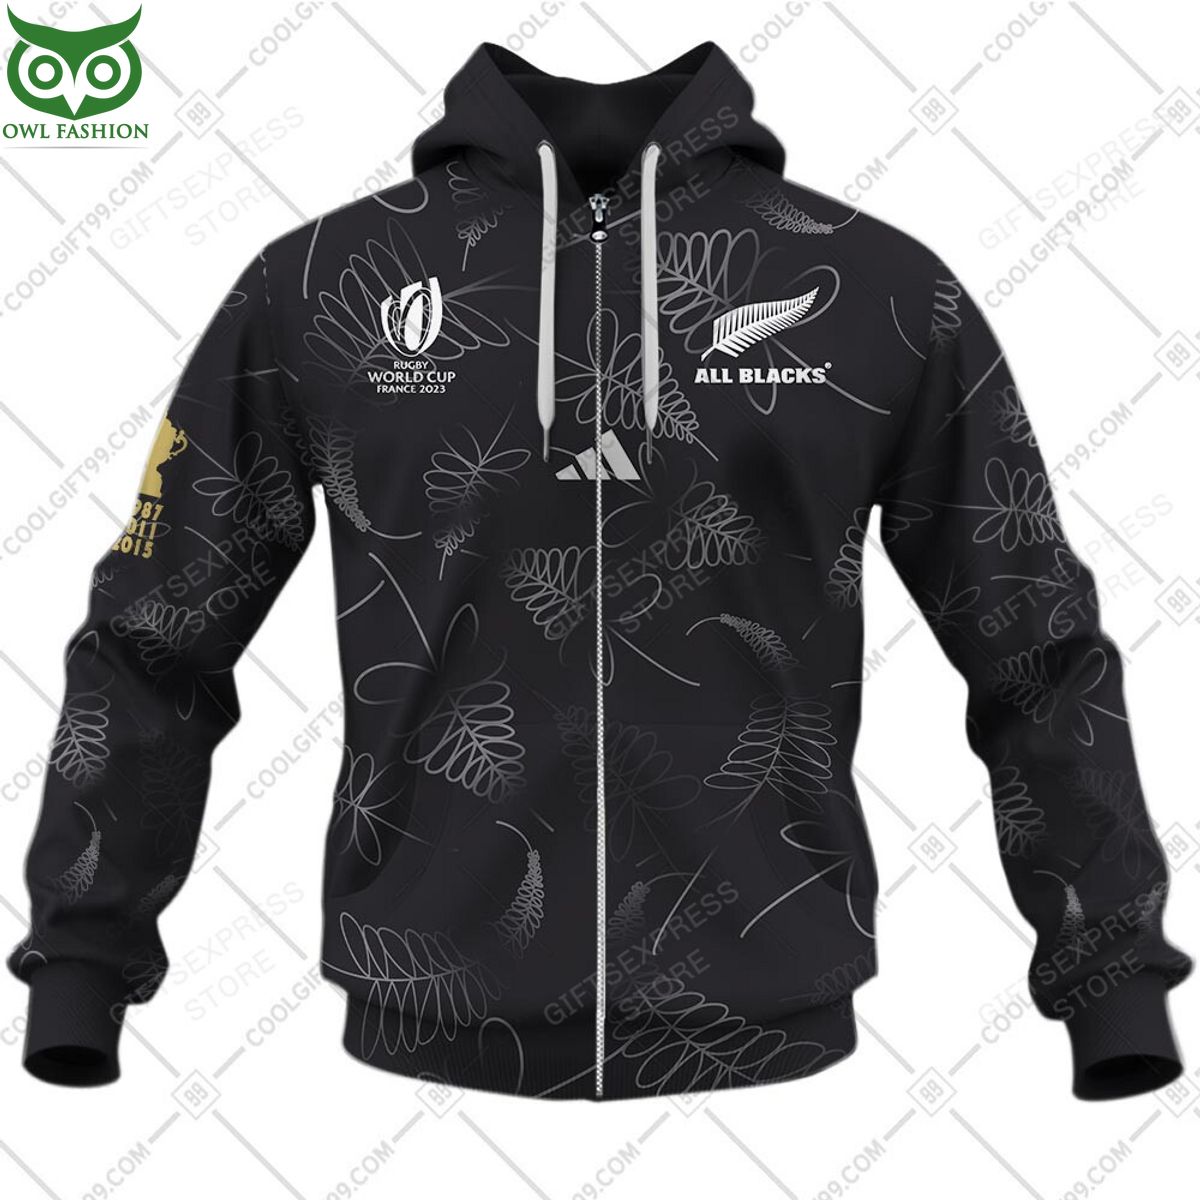 rugby world cup new zealand all black personalized 3d hoodie tshirt 7 bePx2.jpg